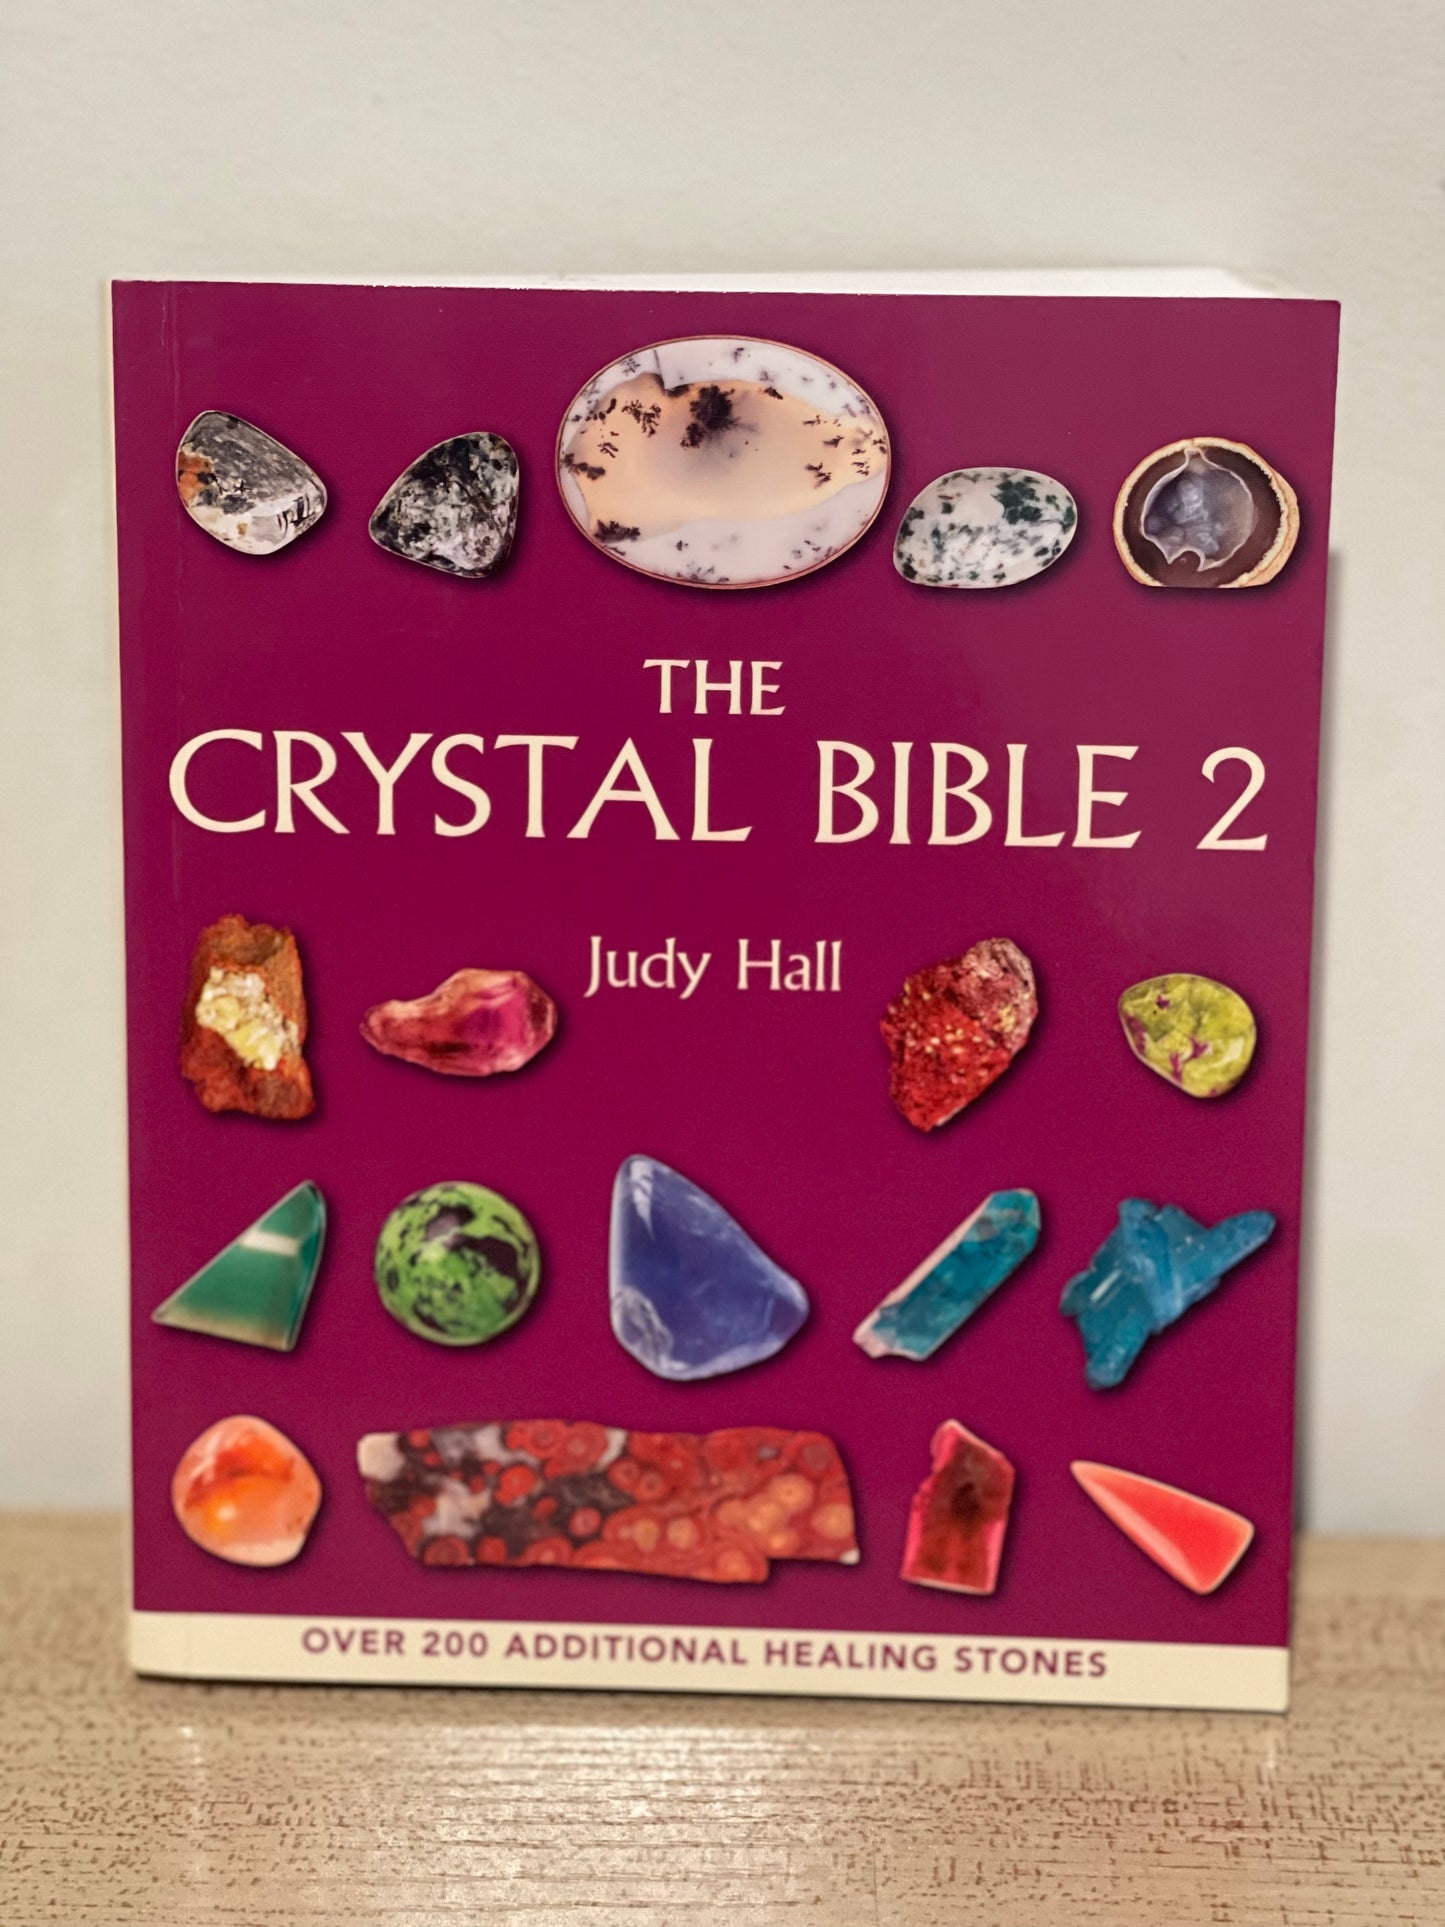 The Crystal Bible 2